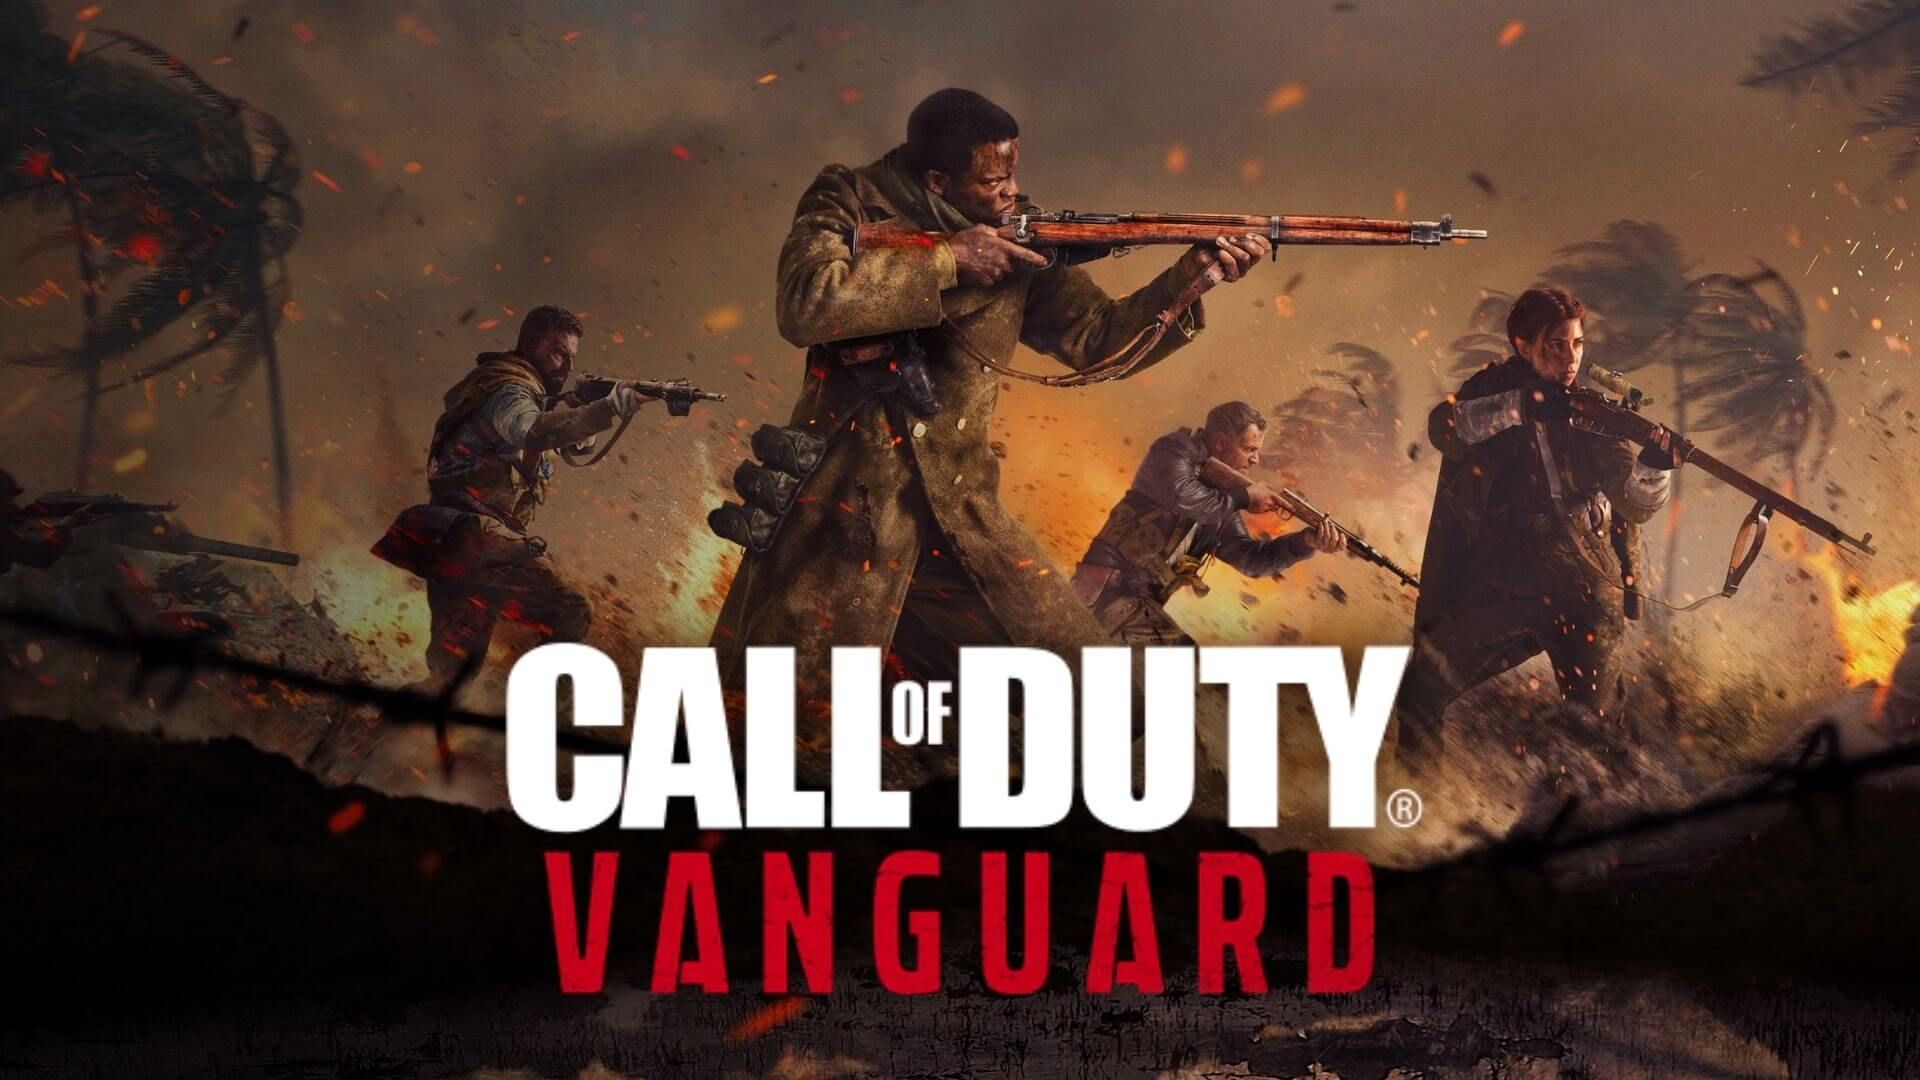 Is Call Of Duty: Vanguard Campaign Co-op